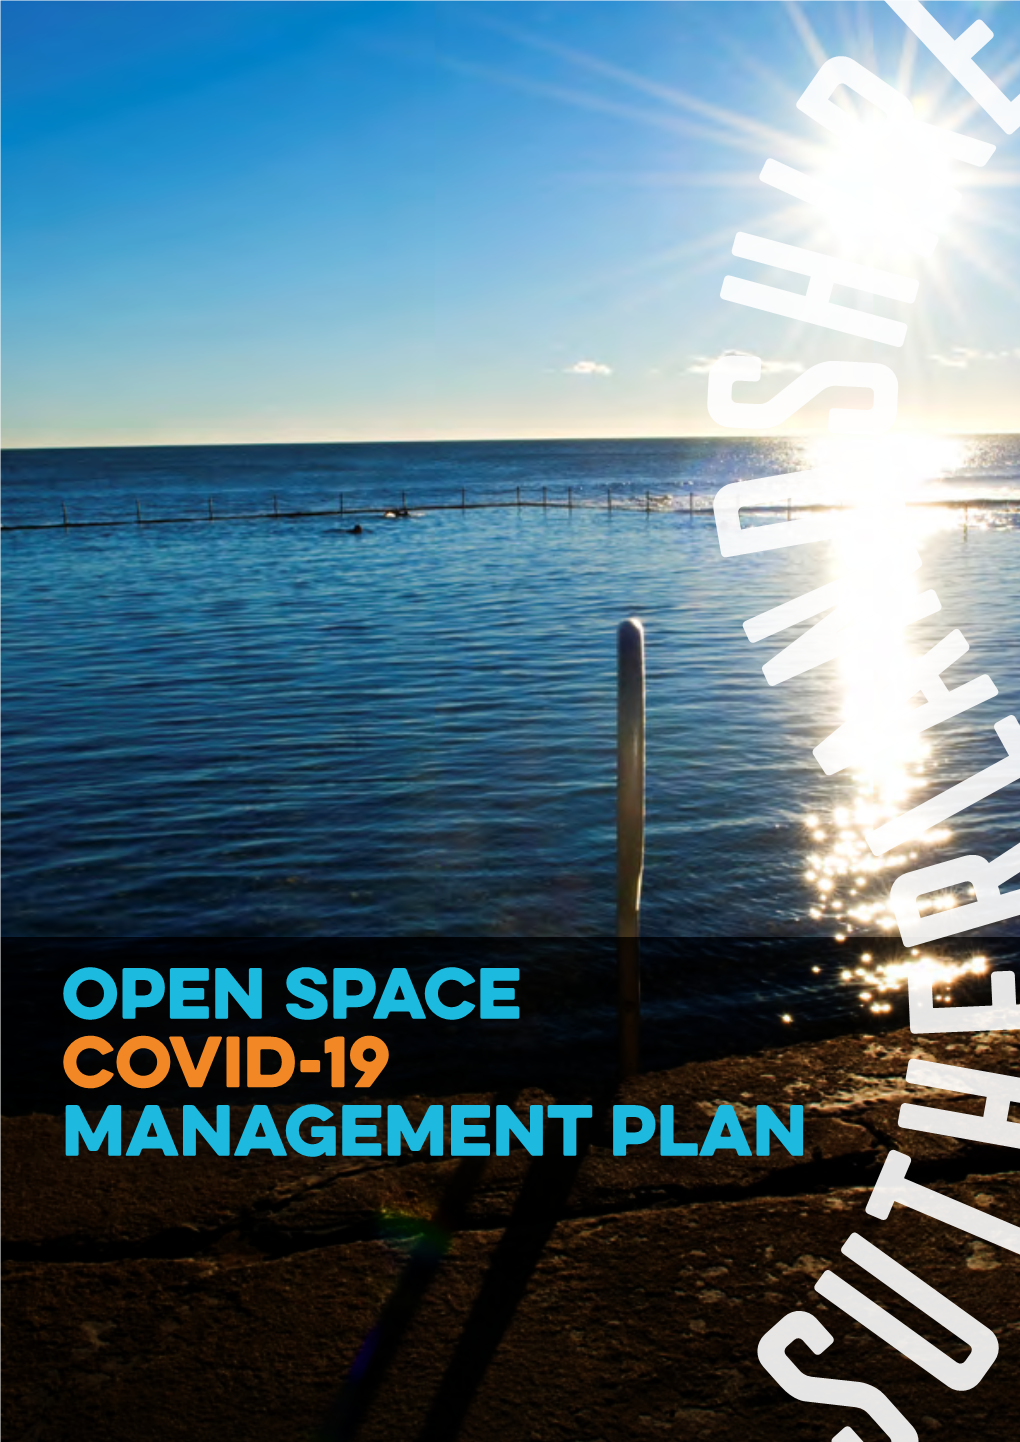 Open Space COVID-19 Management Plan at Sutherland Shire Council We Do More Than Serve Our Community - We Are Our Community